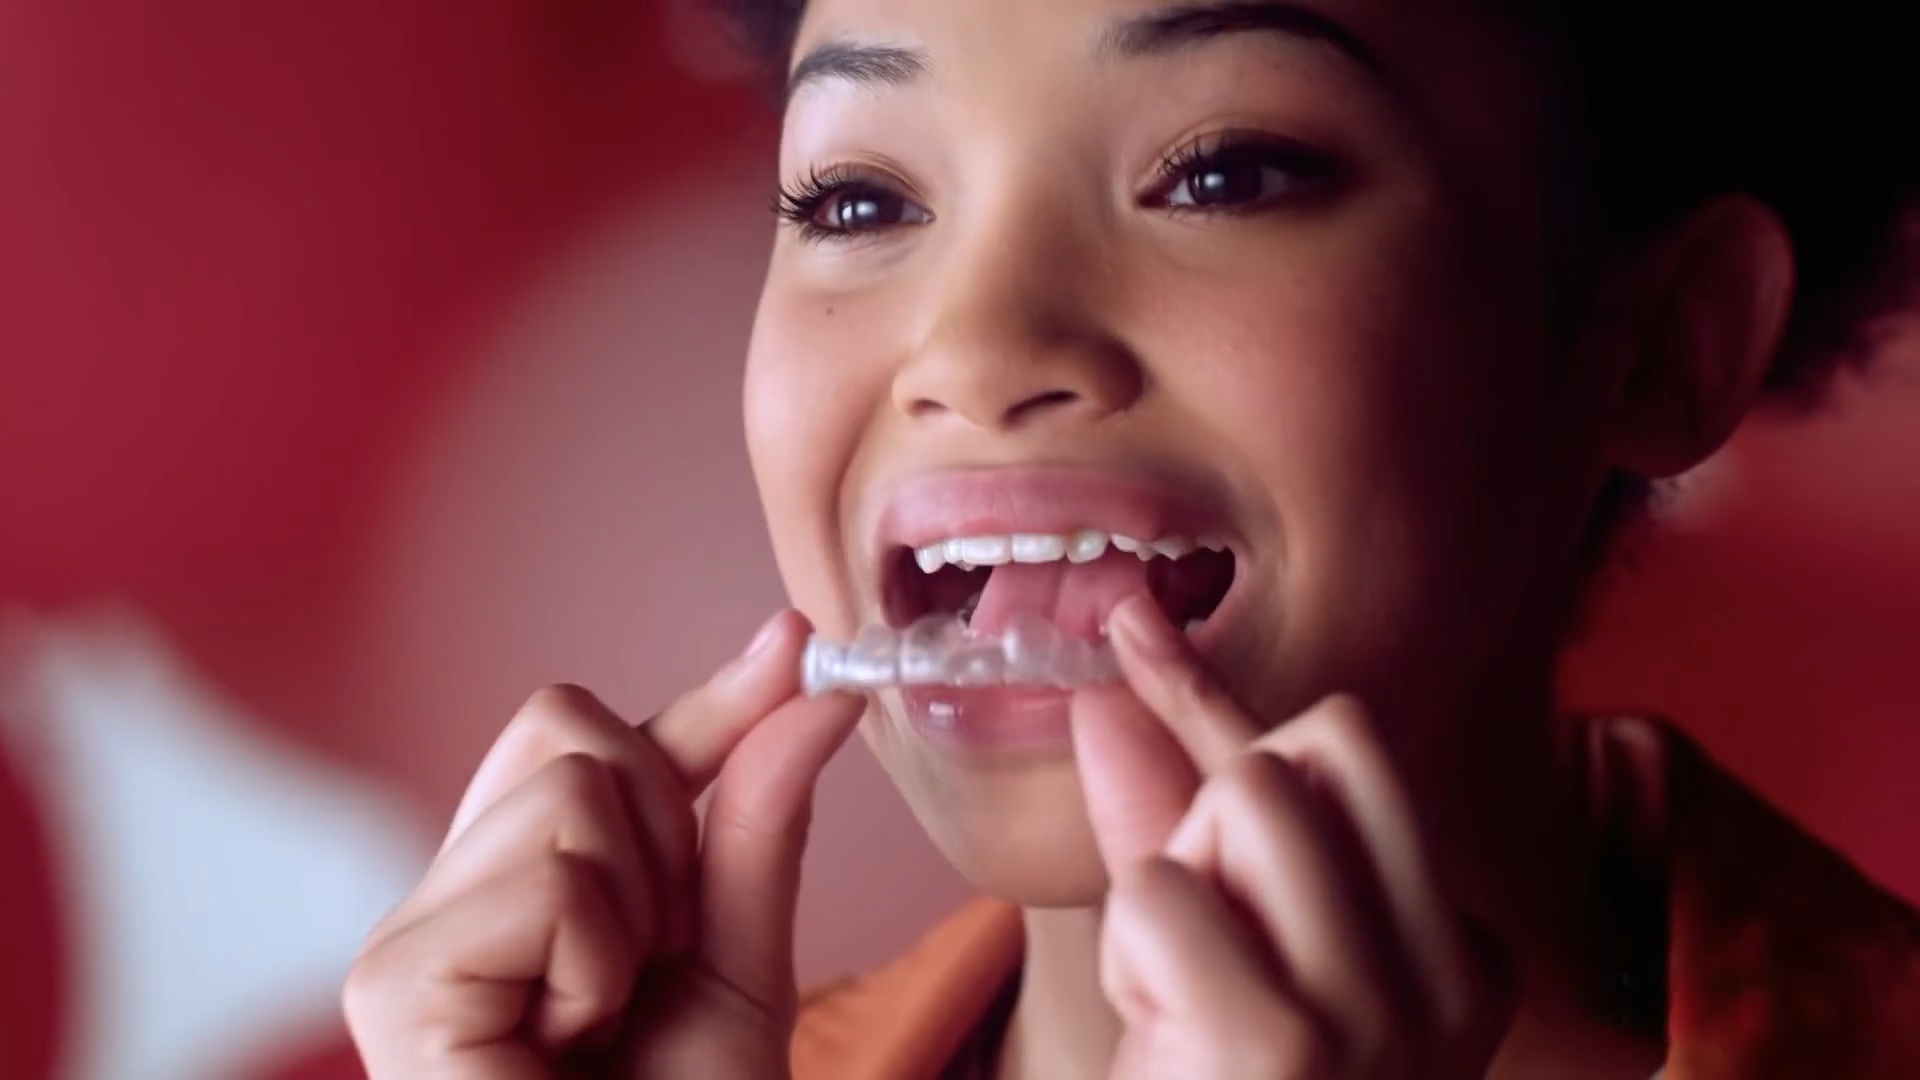 Transforming smiles, changing lives | Invisalign - The clear alternative to braces-0007.png